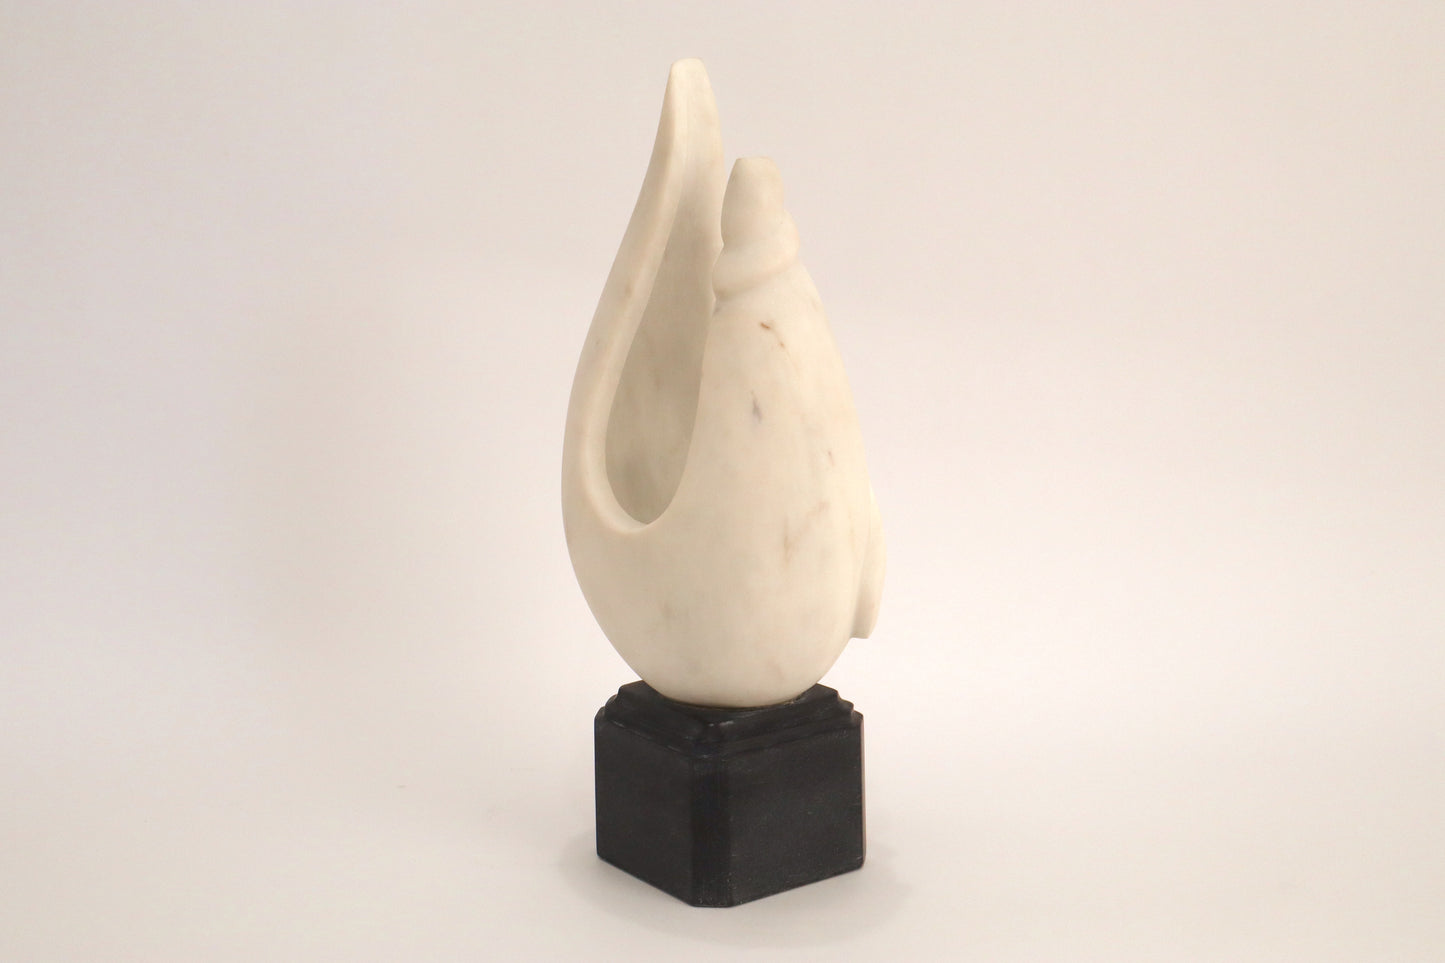 Conch Shell - White and Black Marble (41 cm)